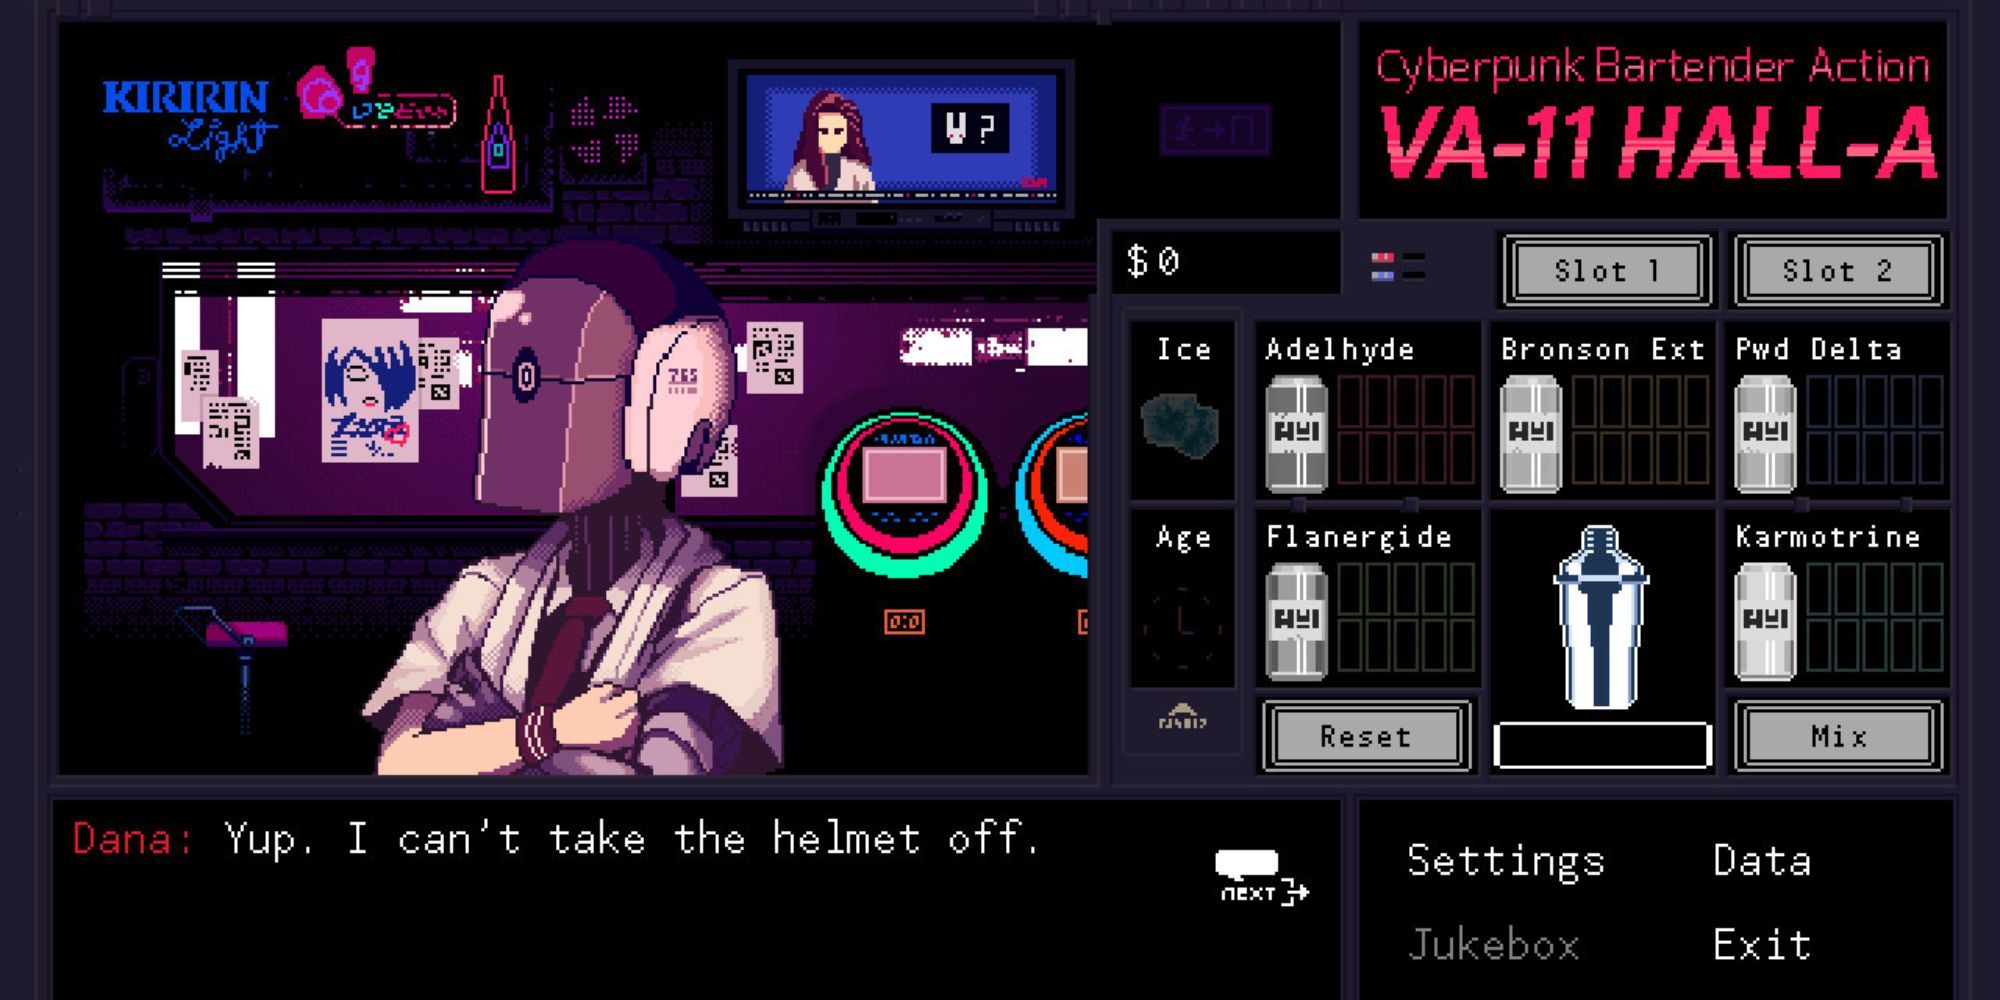 A Person With A Helmet Says He Can't Take It Off At VA-11 Hall-A Cyberpunk Bartender Action